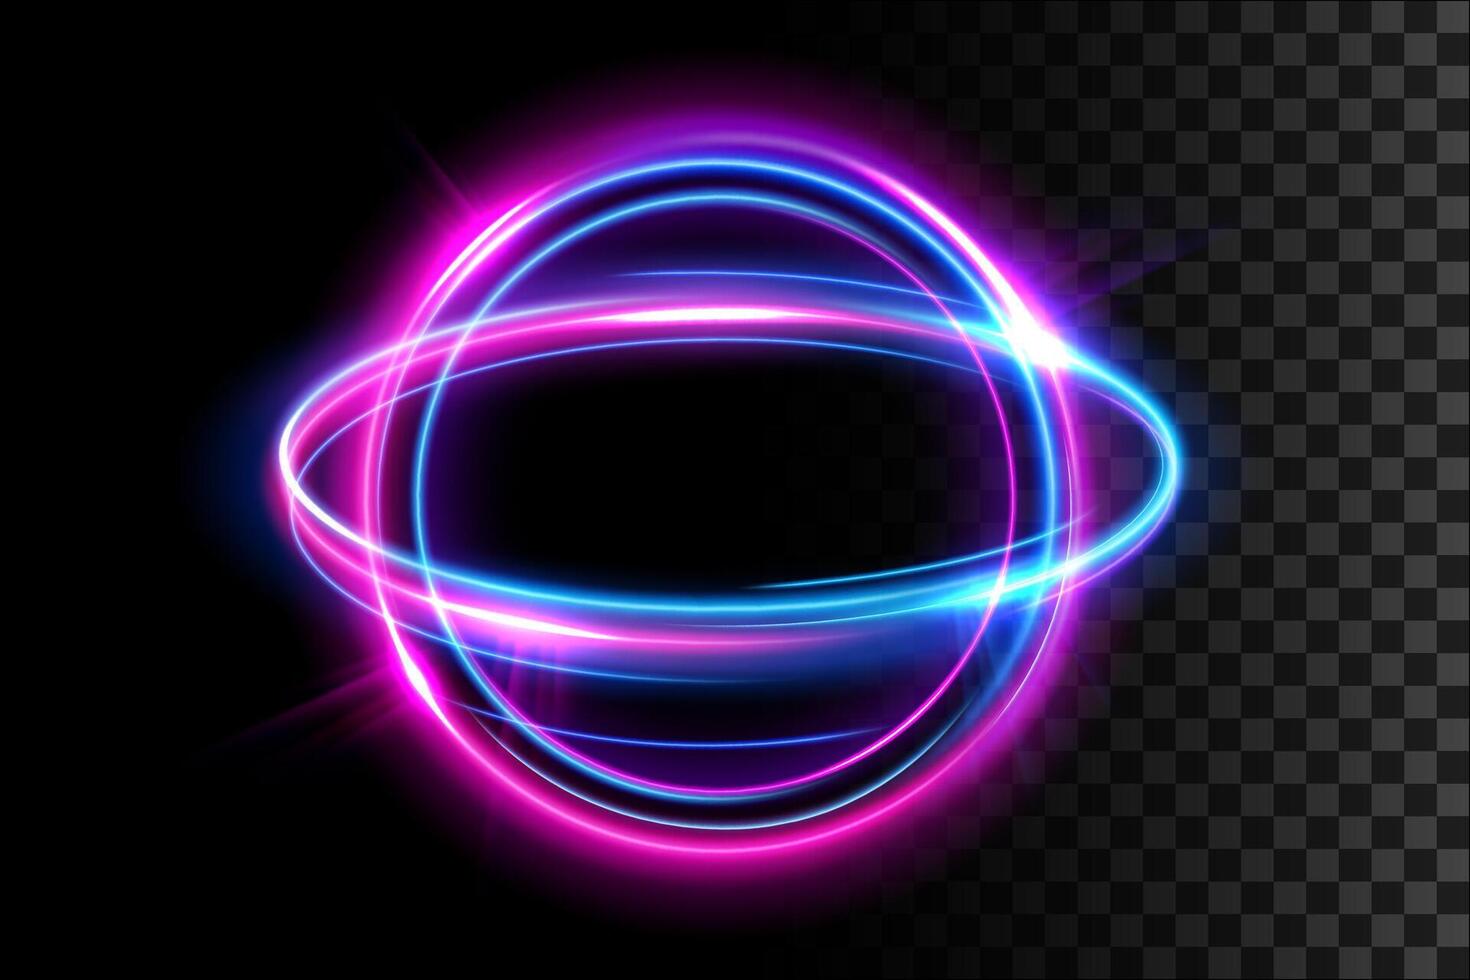 Abstract Ring Light Effect Isolated on Dark Background, Vector Illustration